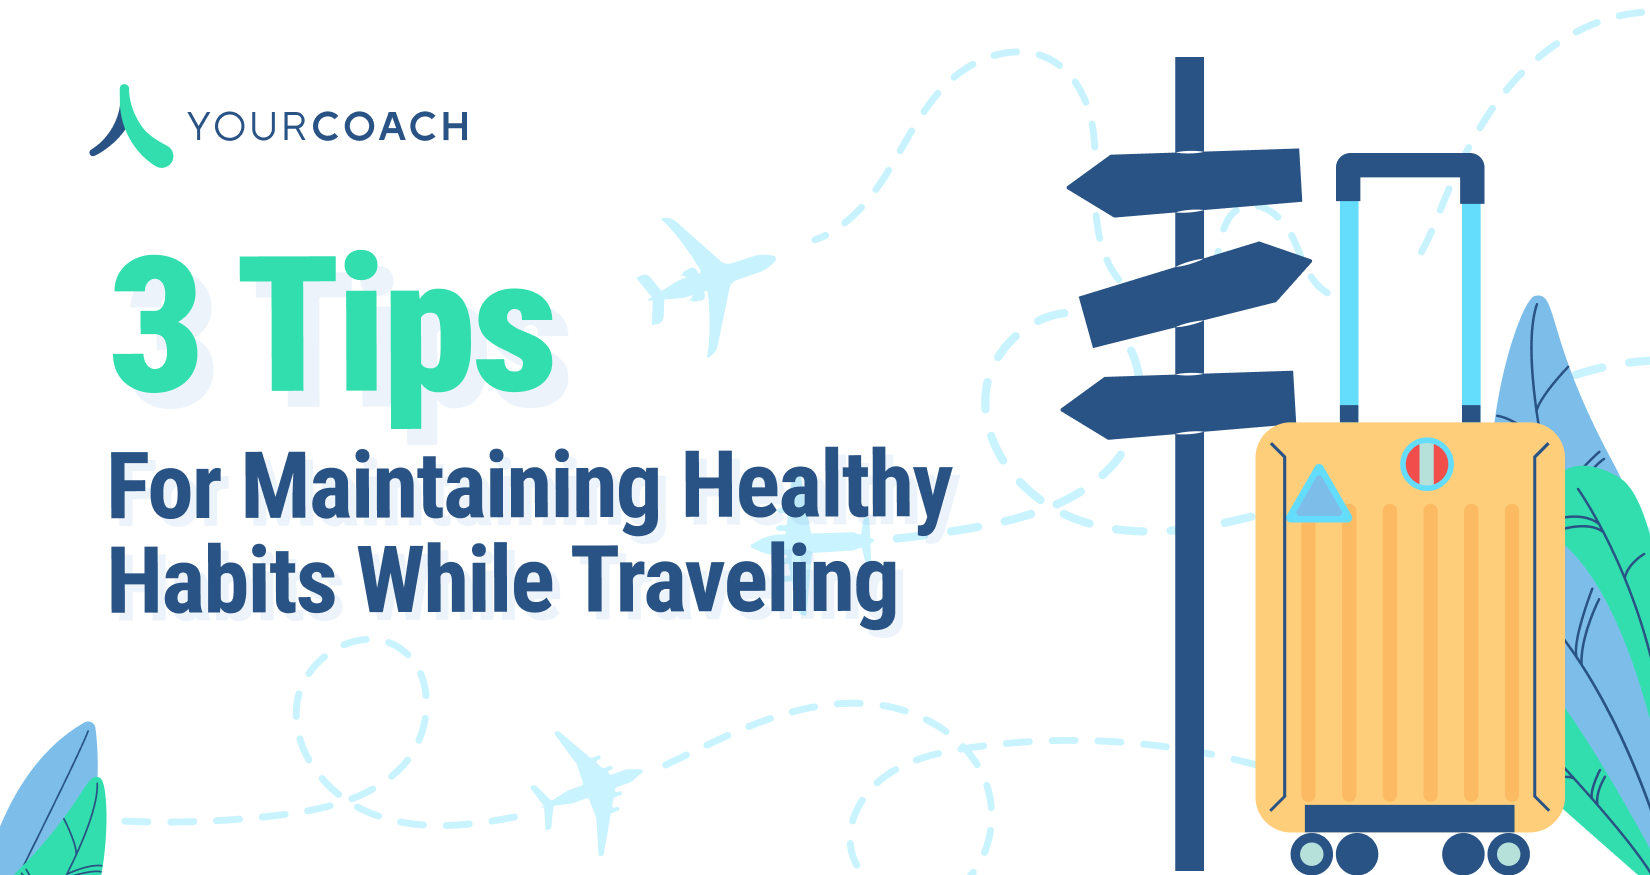 3 Tips for Maintaining Healthy Habits While Traveling